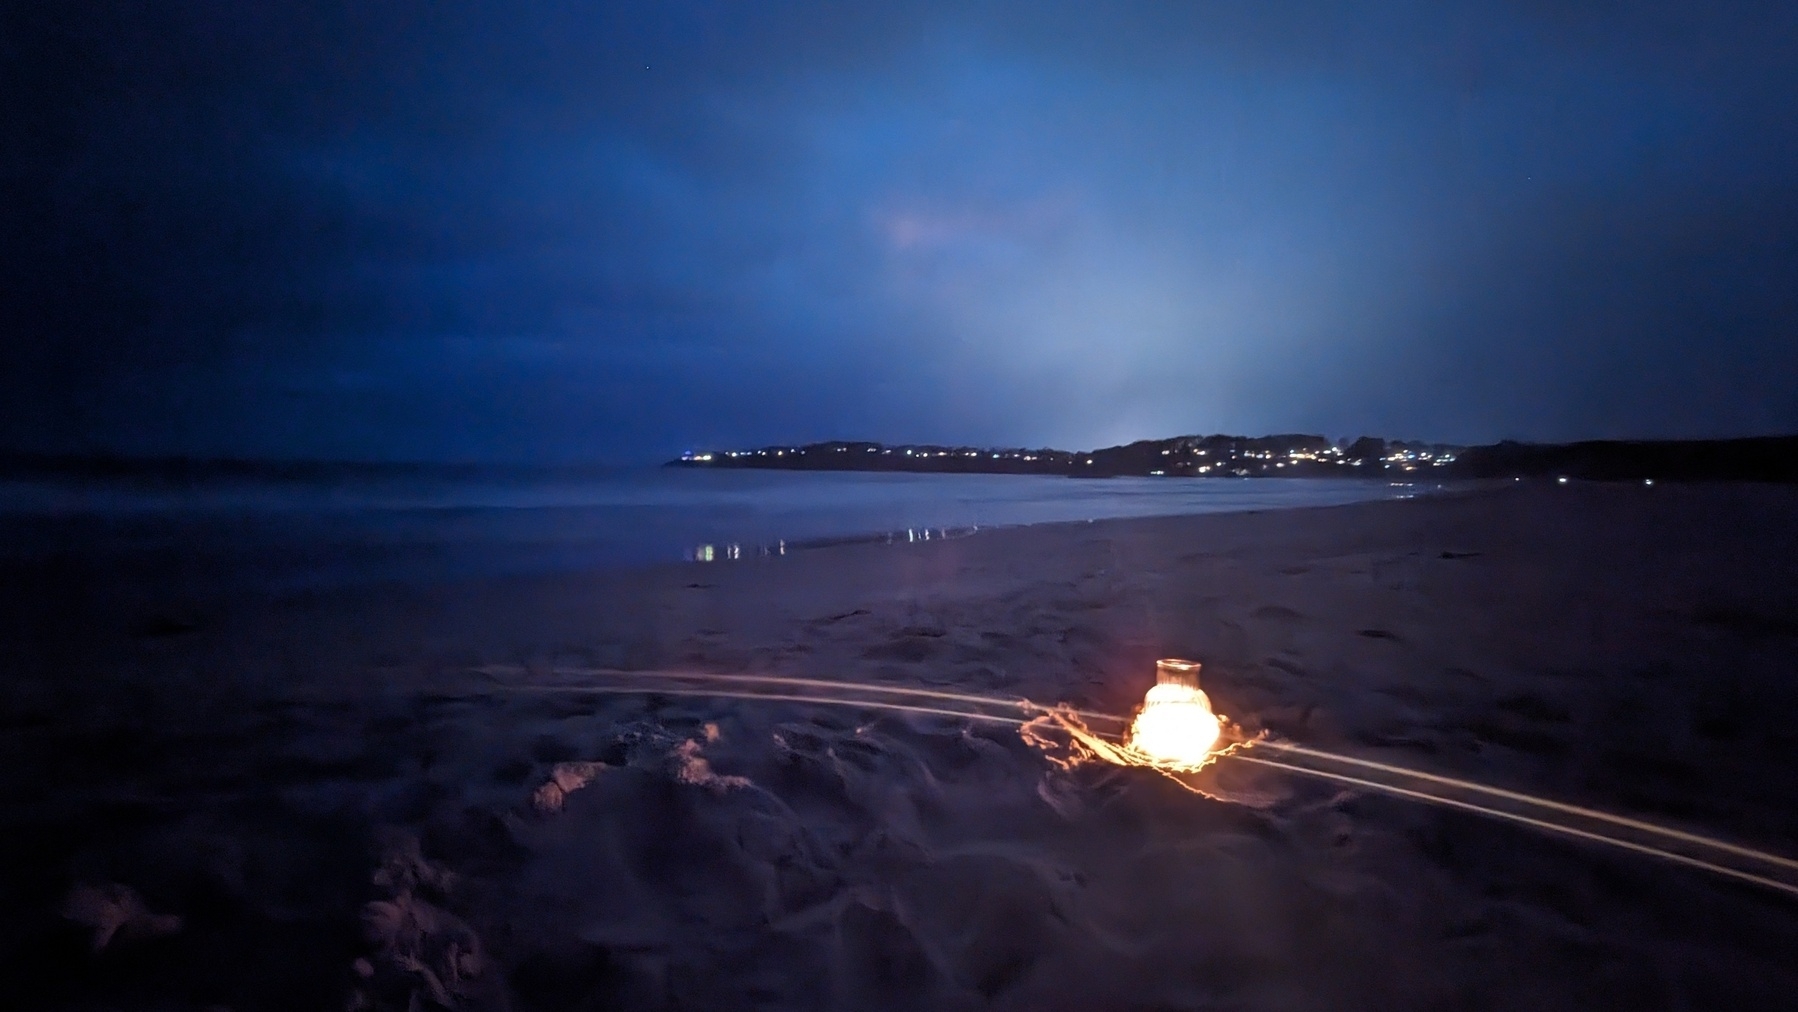 A lantern shines on a beach in the dark. Lights shine on the distant shoreline.